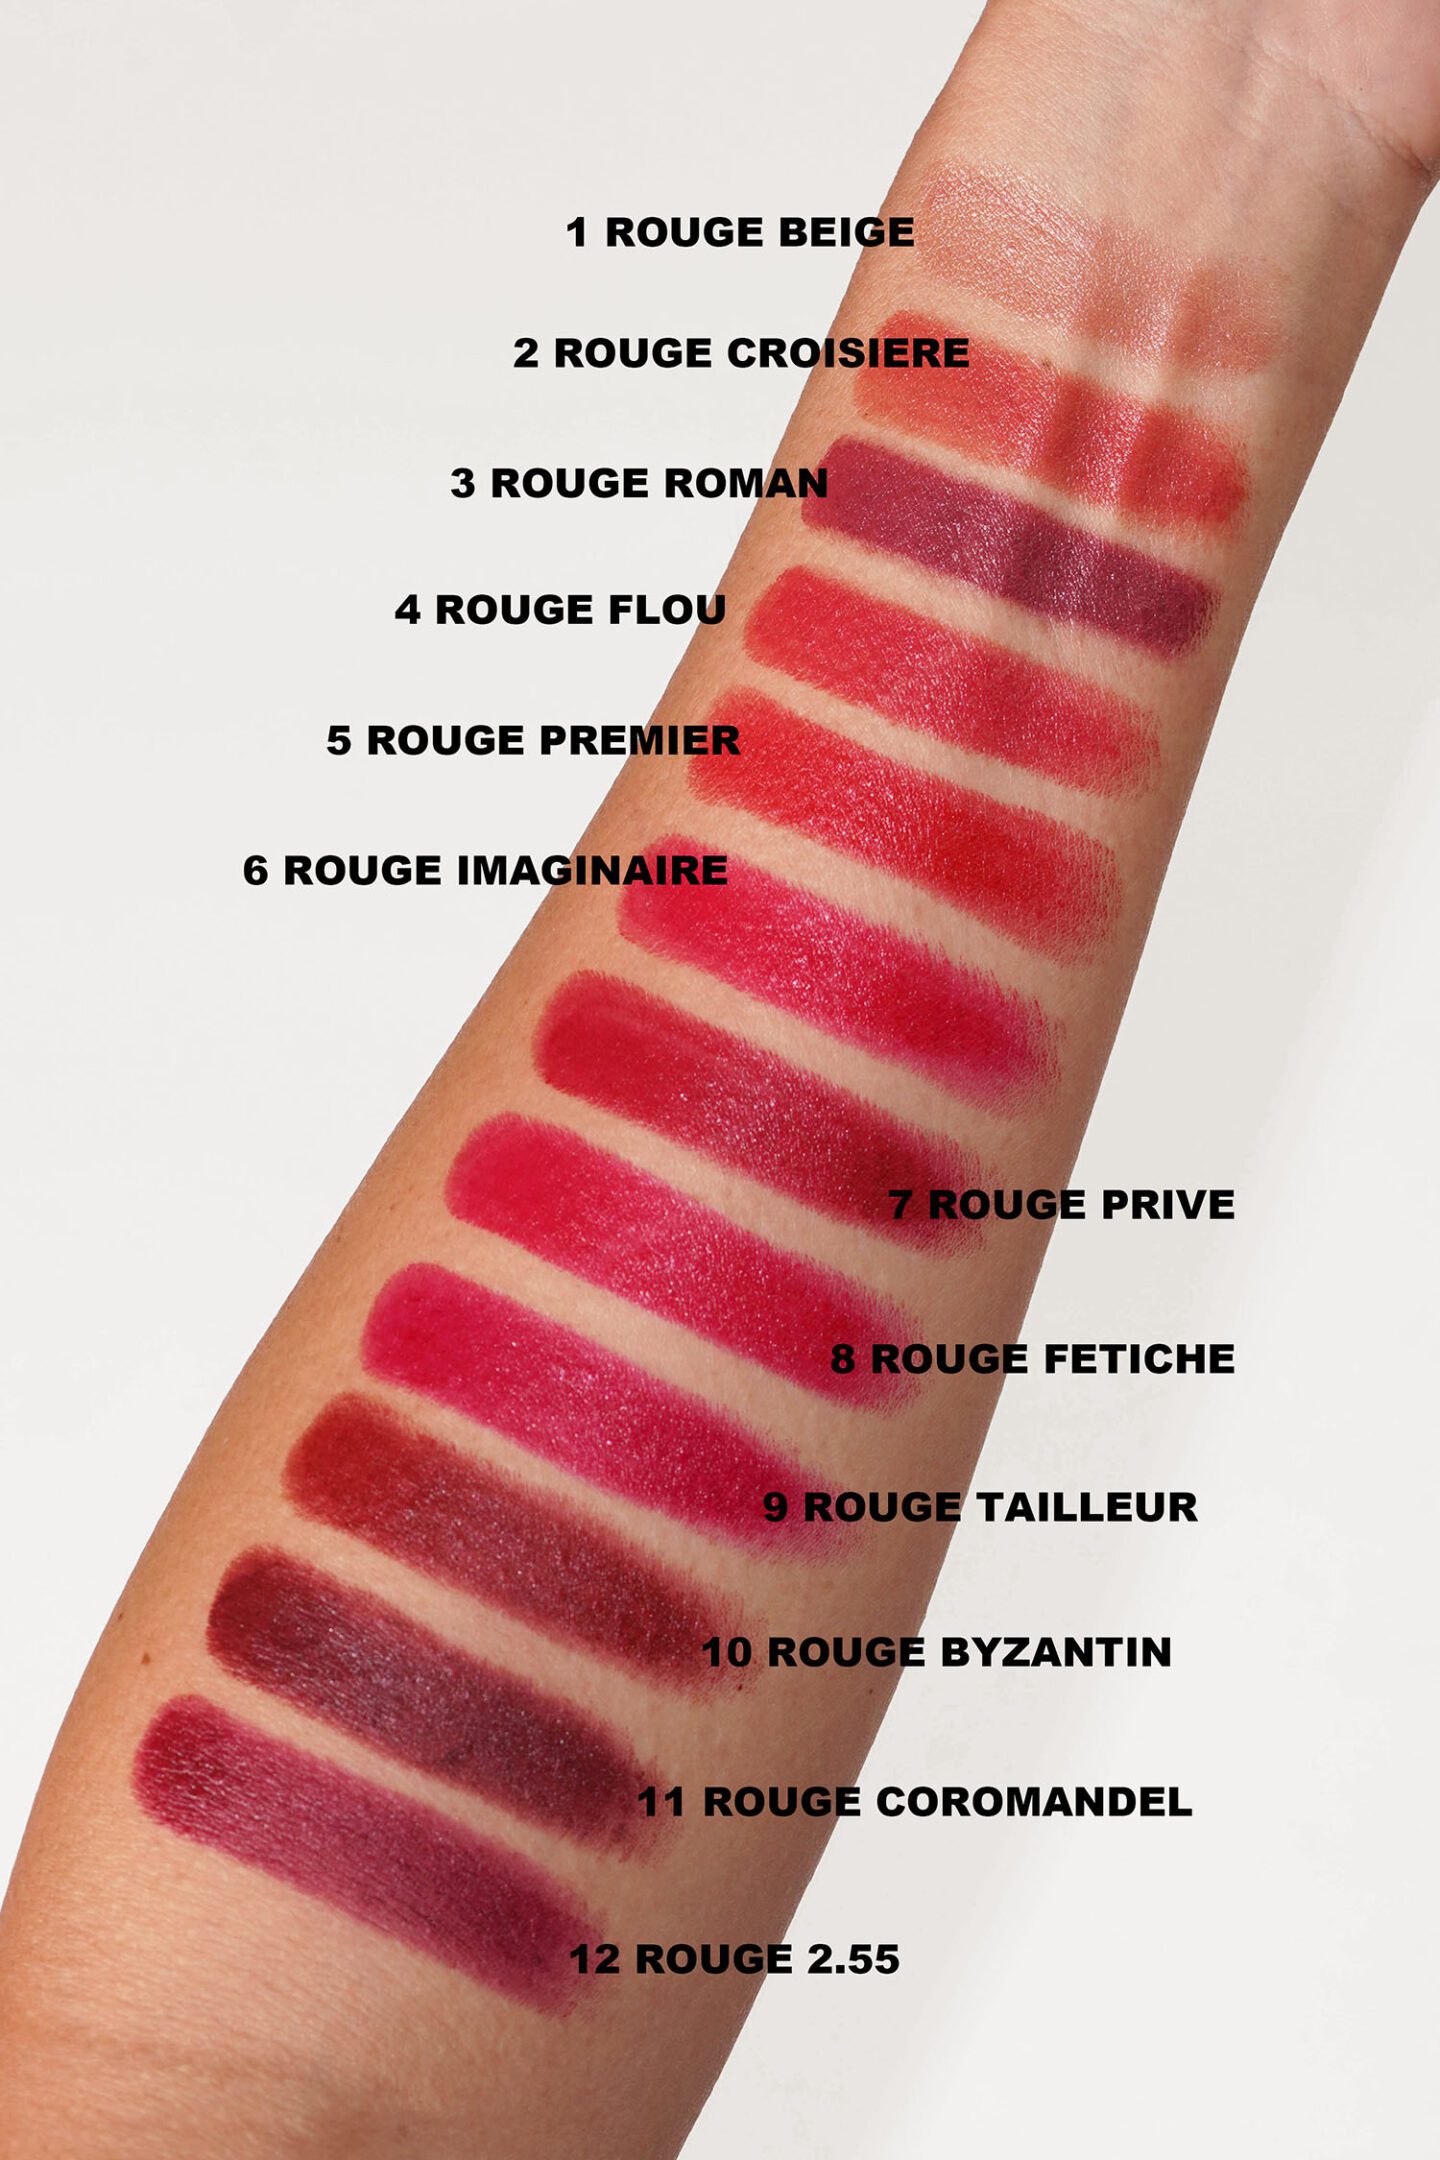 Chanel 31 Le Rouge Satin Lipstick swatches